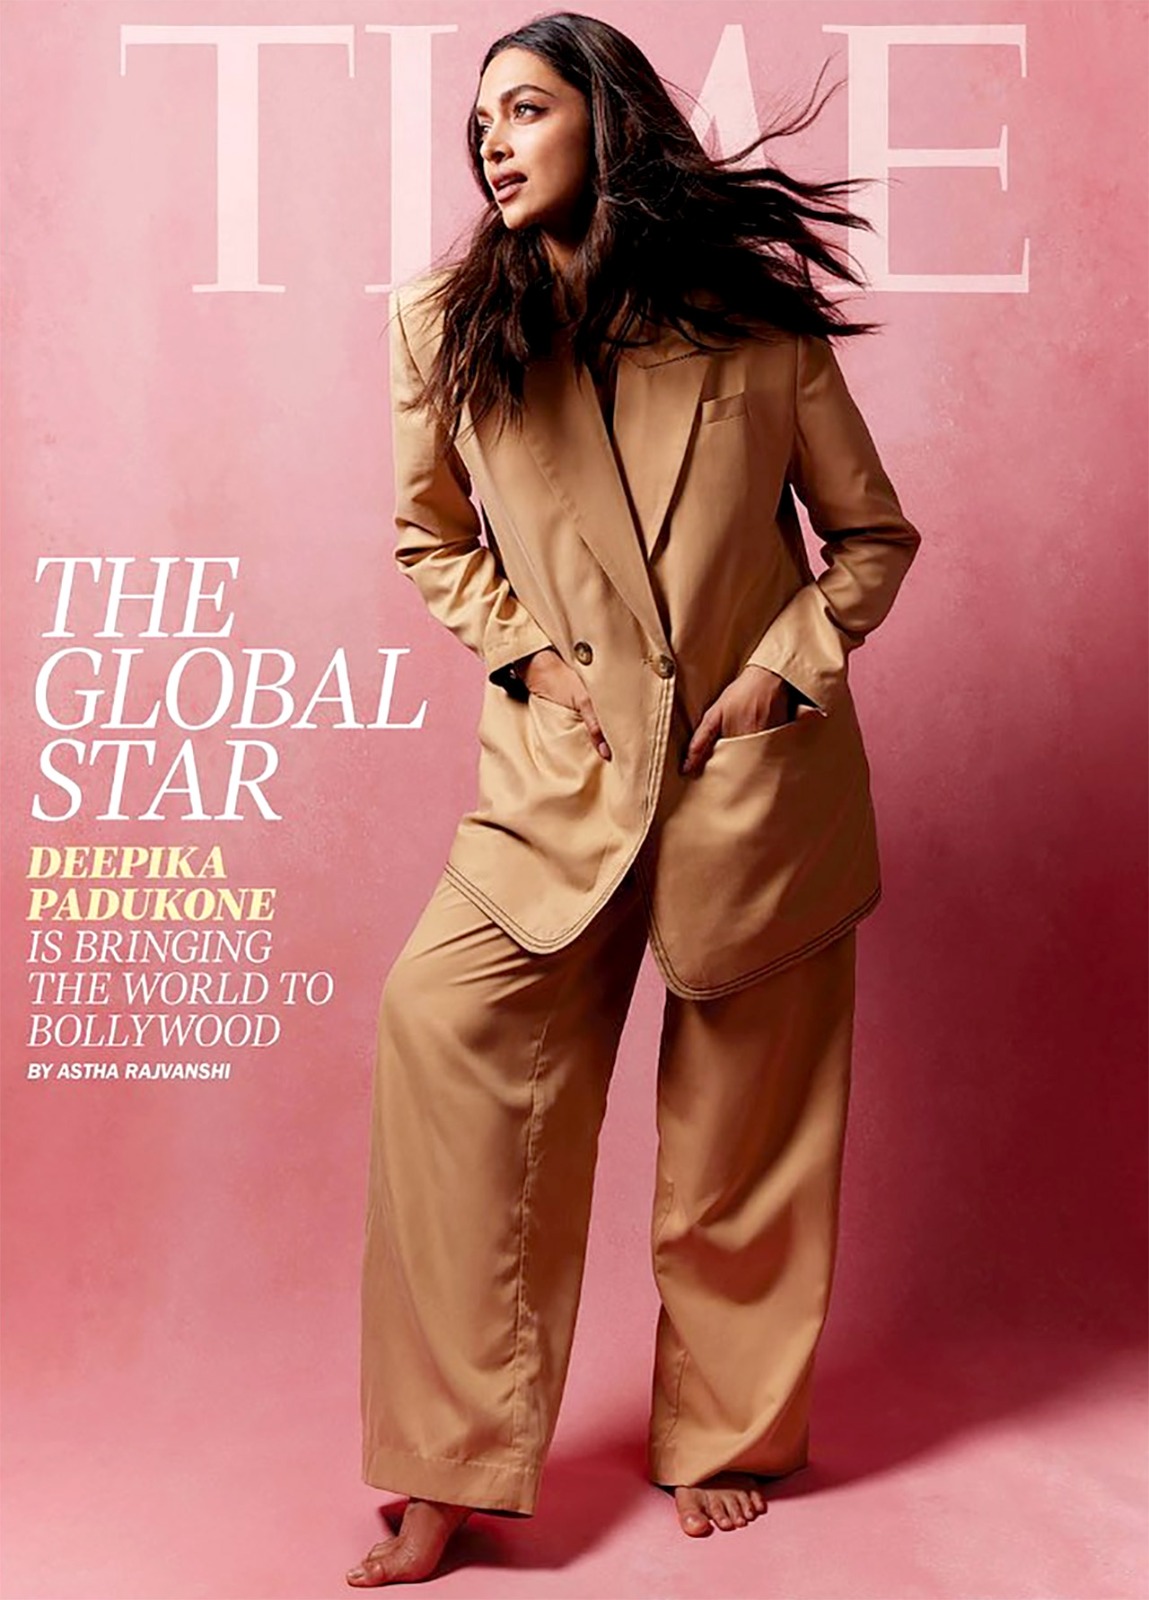 Deepika Padukone turns boss-lady for the cover of TIME Magazine; joins the likes of Barrack Obama, Oprah Winfrey